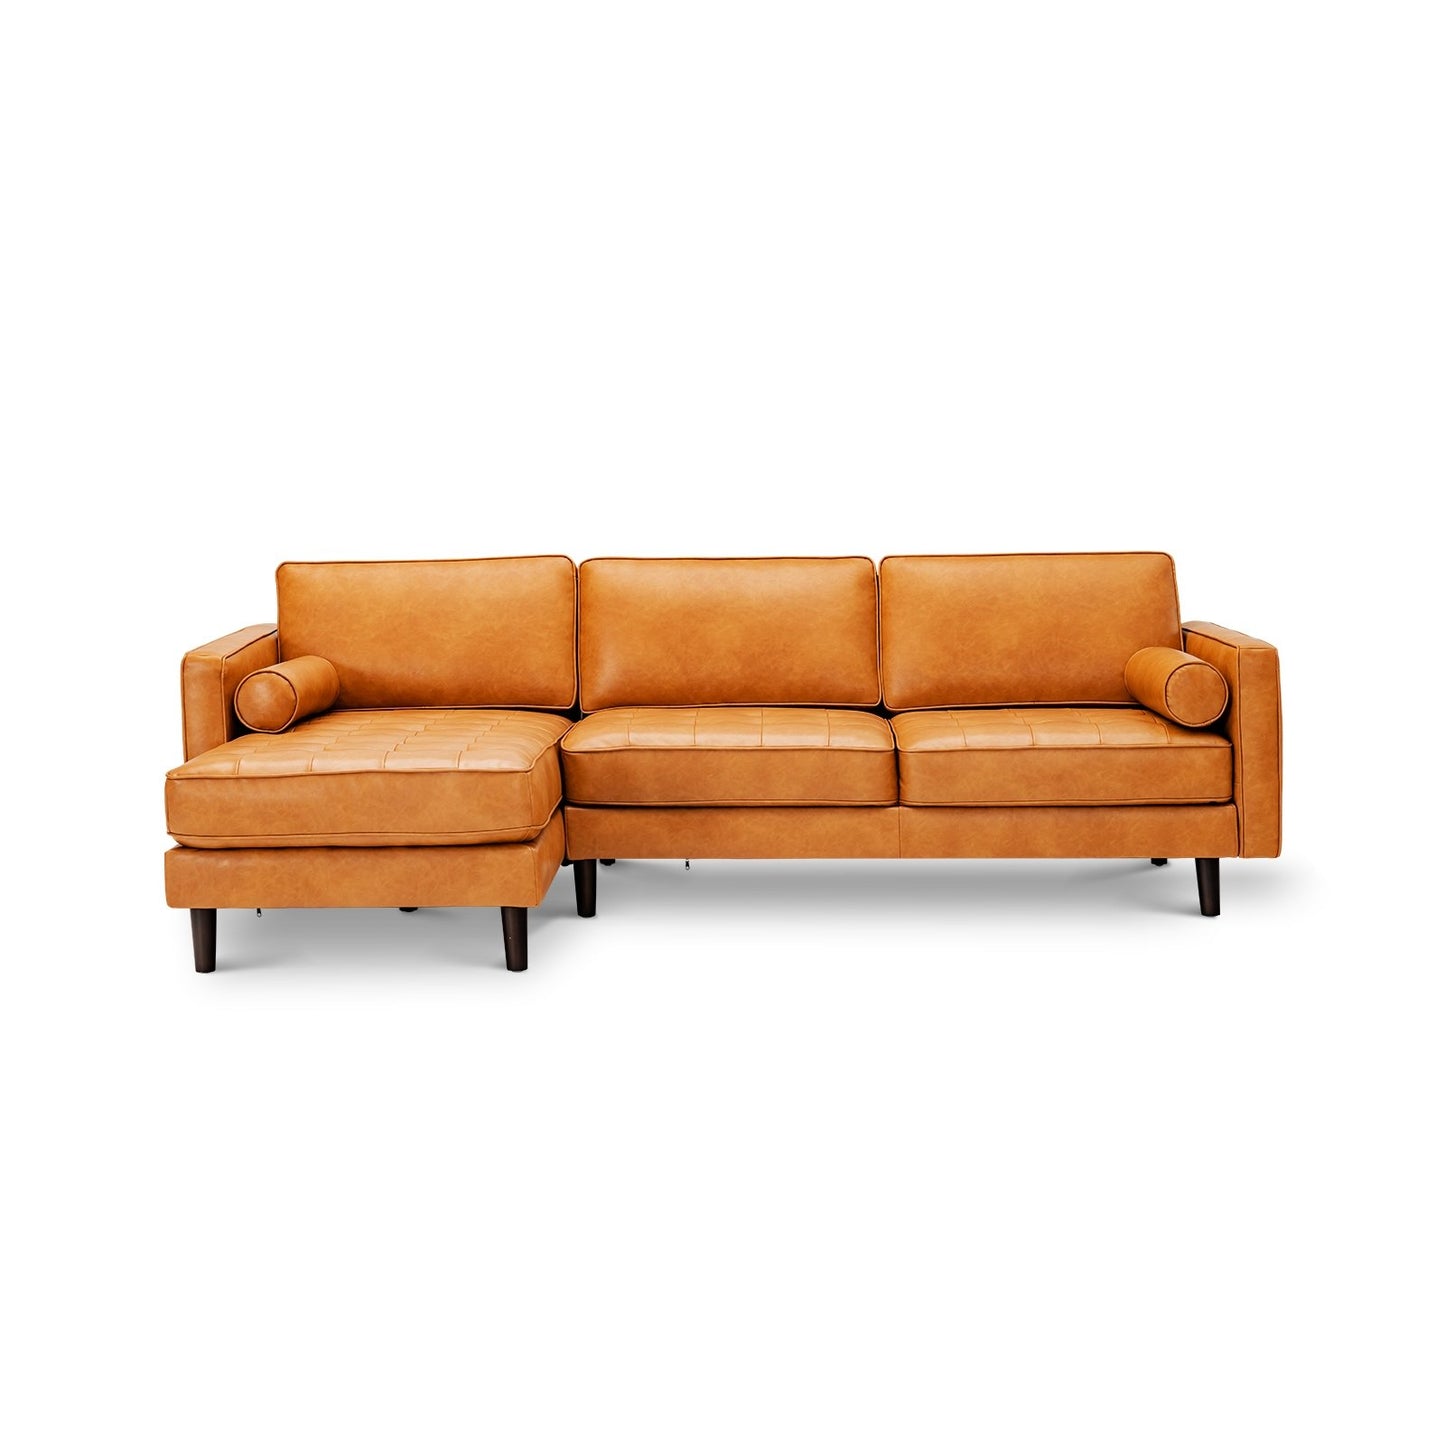 3-Seat L-Shaped Sectional Sofa Couch for Living Room, Orange